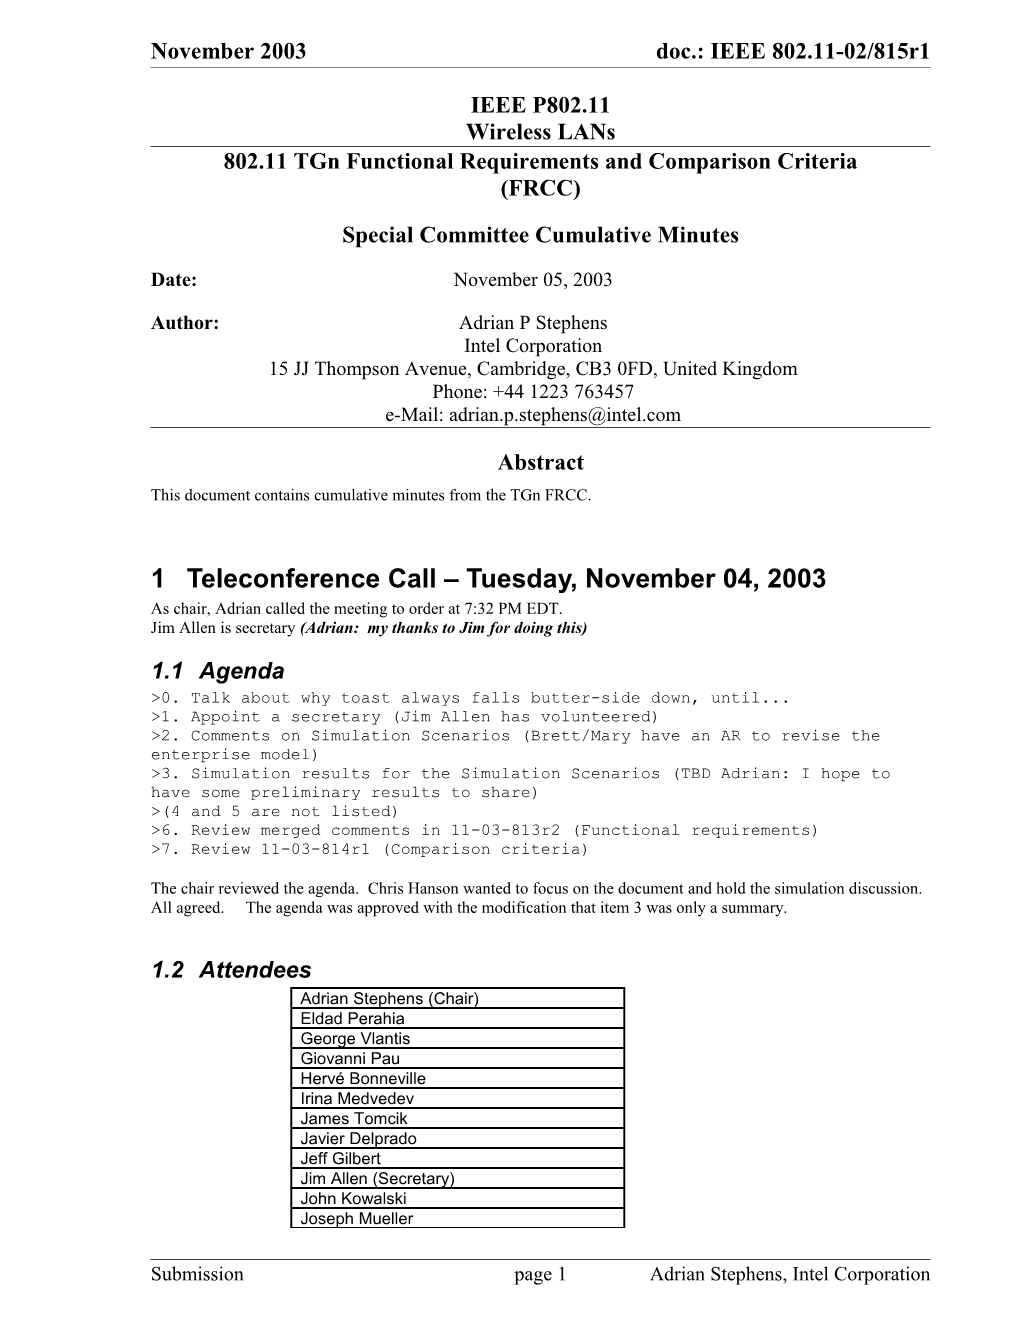 802.11 Tgn Functional Requirements and Comparison Criteria (FRCC) s1